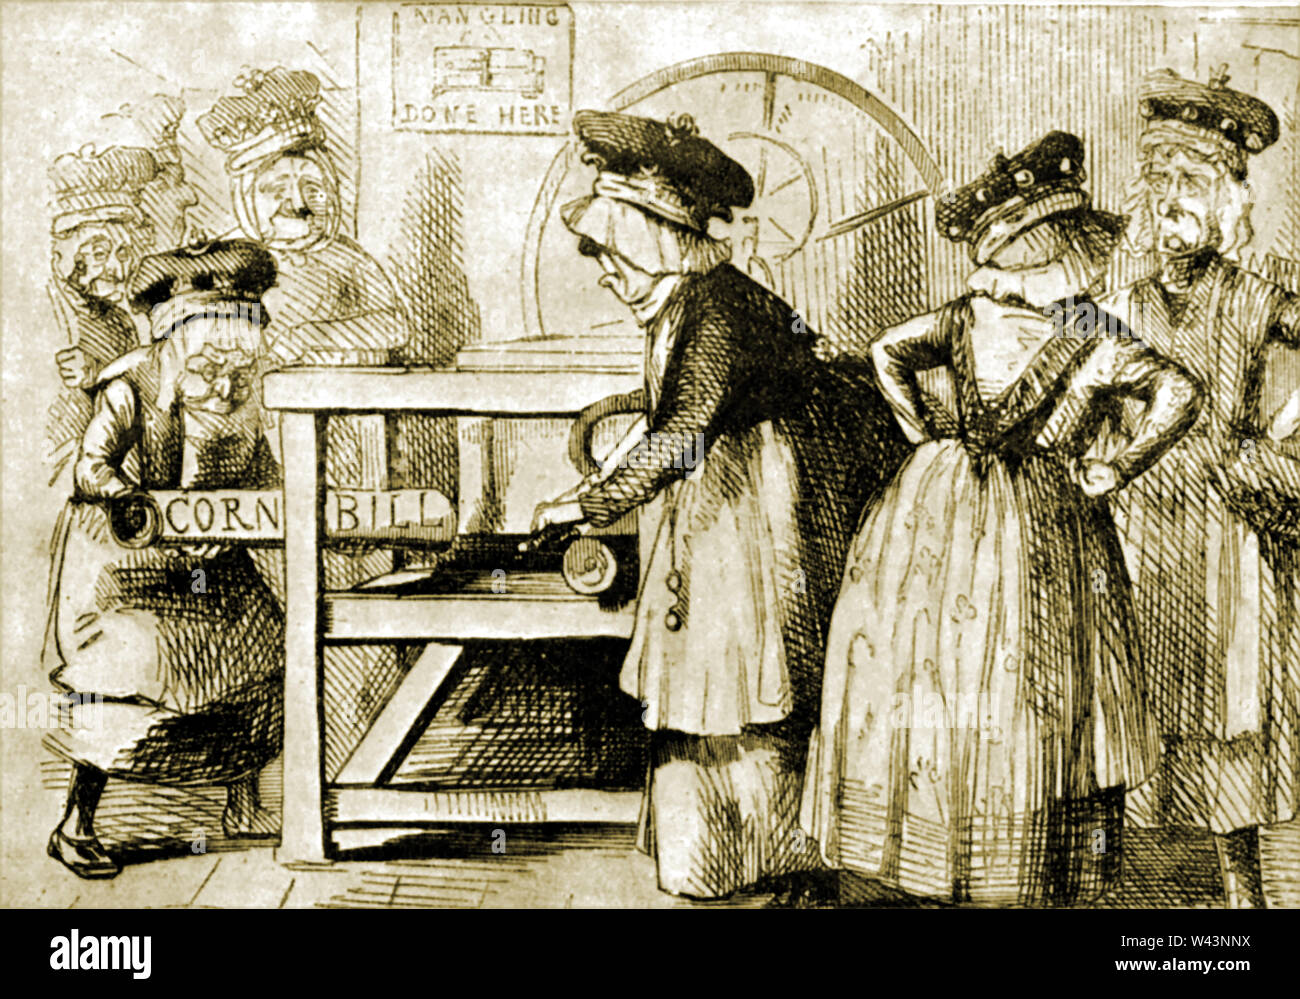 Political cartoon from the 1840's  mocking the aristocracy who were accused of mangling the repeal of the CORN LAWS,  tariffs and other trade restrictions on imported food and grain causing high food prices. Stock Photo